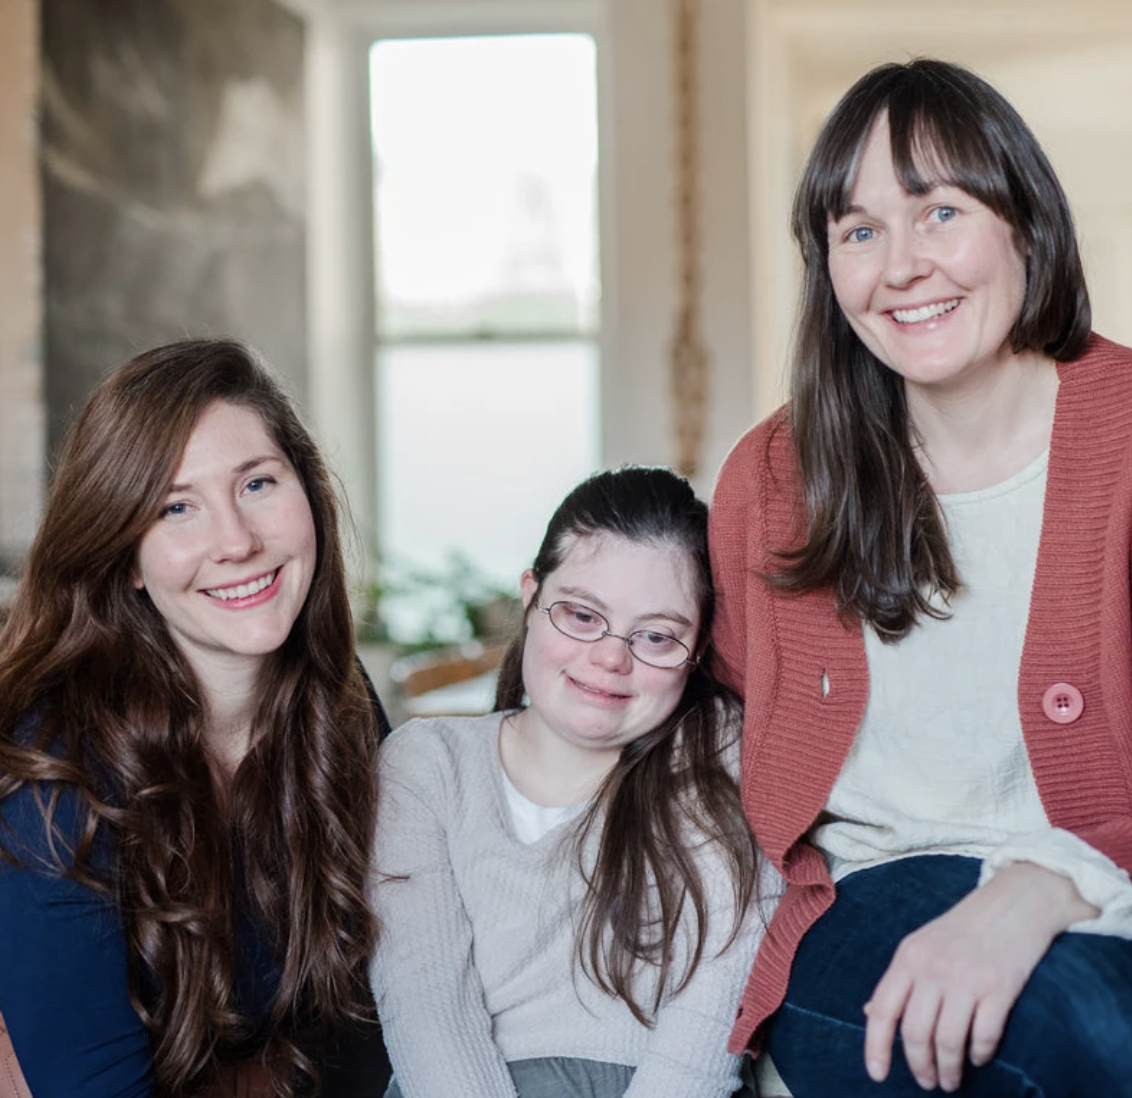 3 interabled women smile as they hug